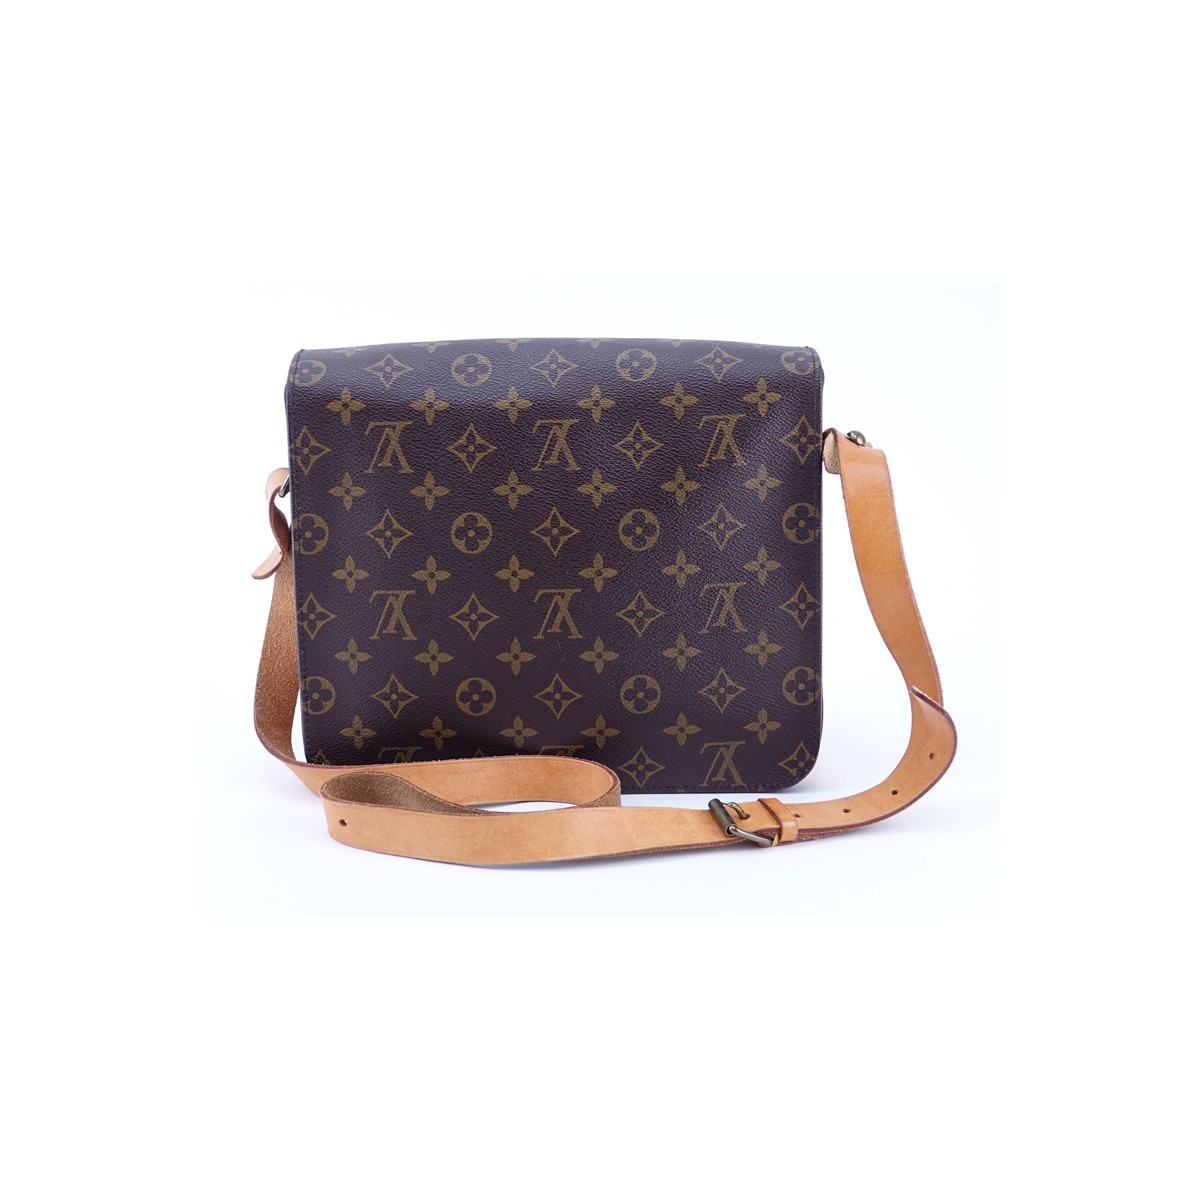 Louis Vuitton Brown Monogram Coated Canvas Cartouchiere GM Shoulder Bag. Golden brass hardware, brown interior with 2 compartments.